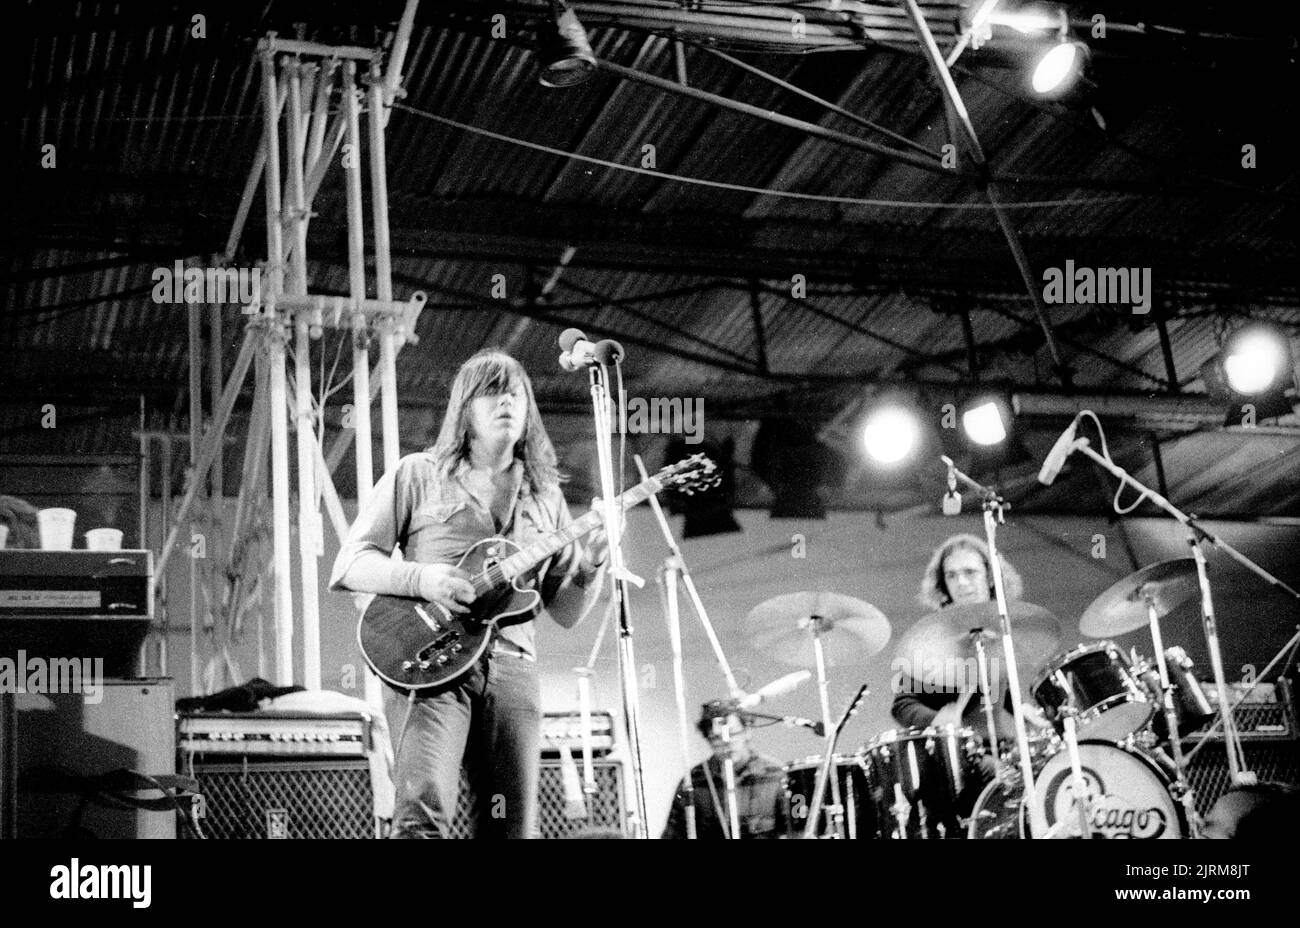 Chicago band playing at the 1970 Isle of Wight Festival, UK Stock Photo